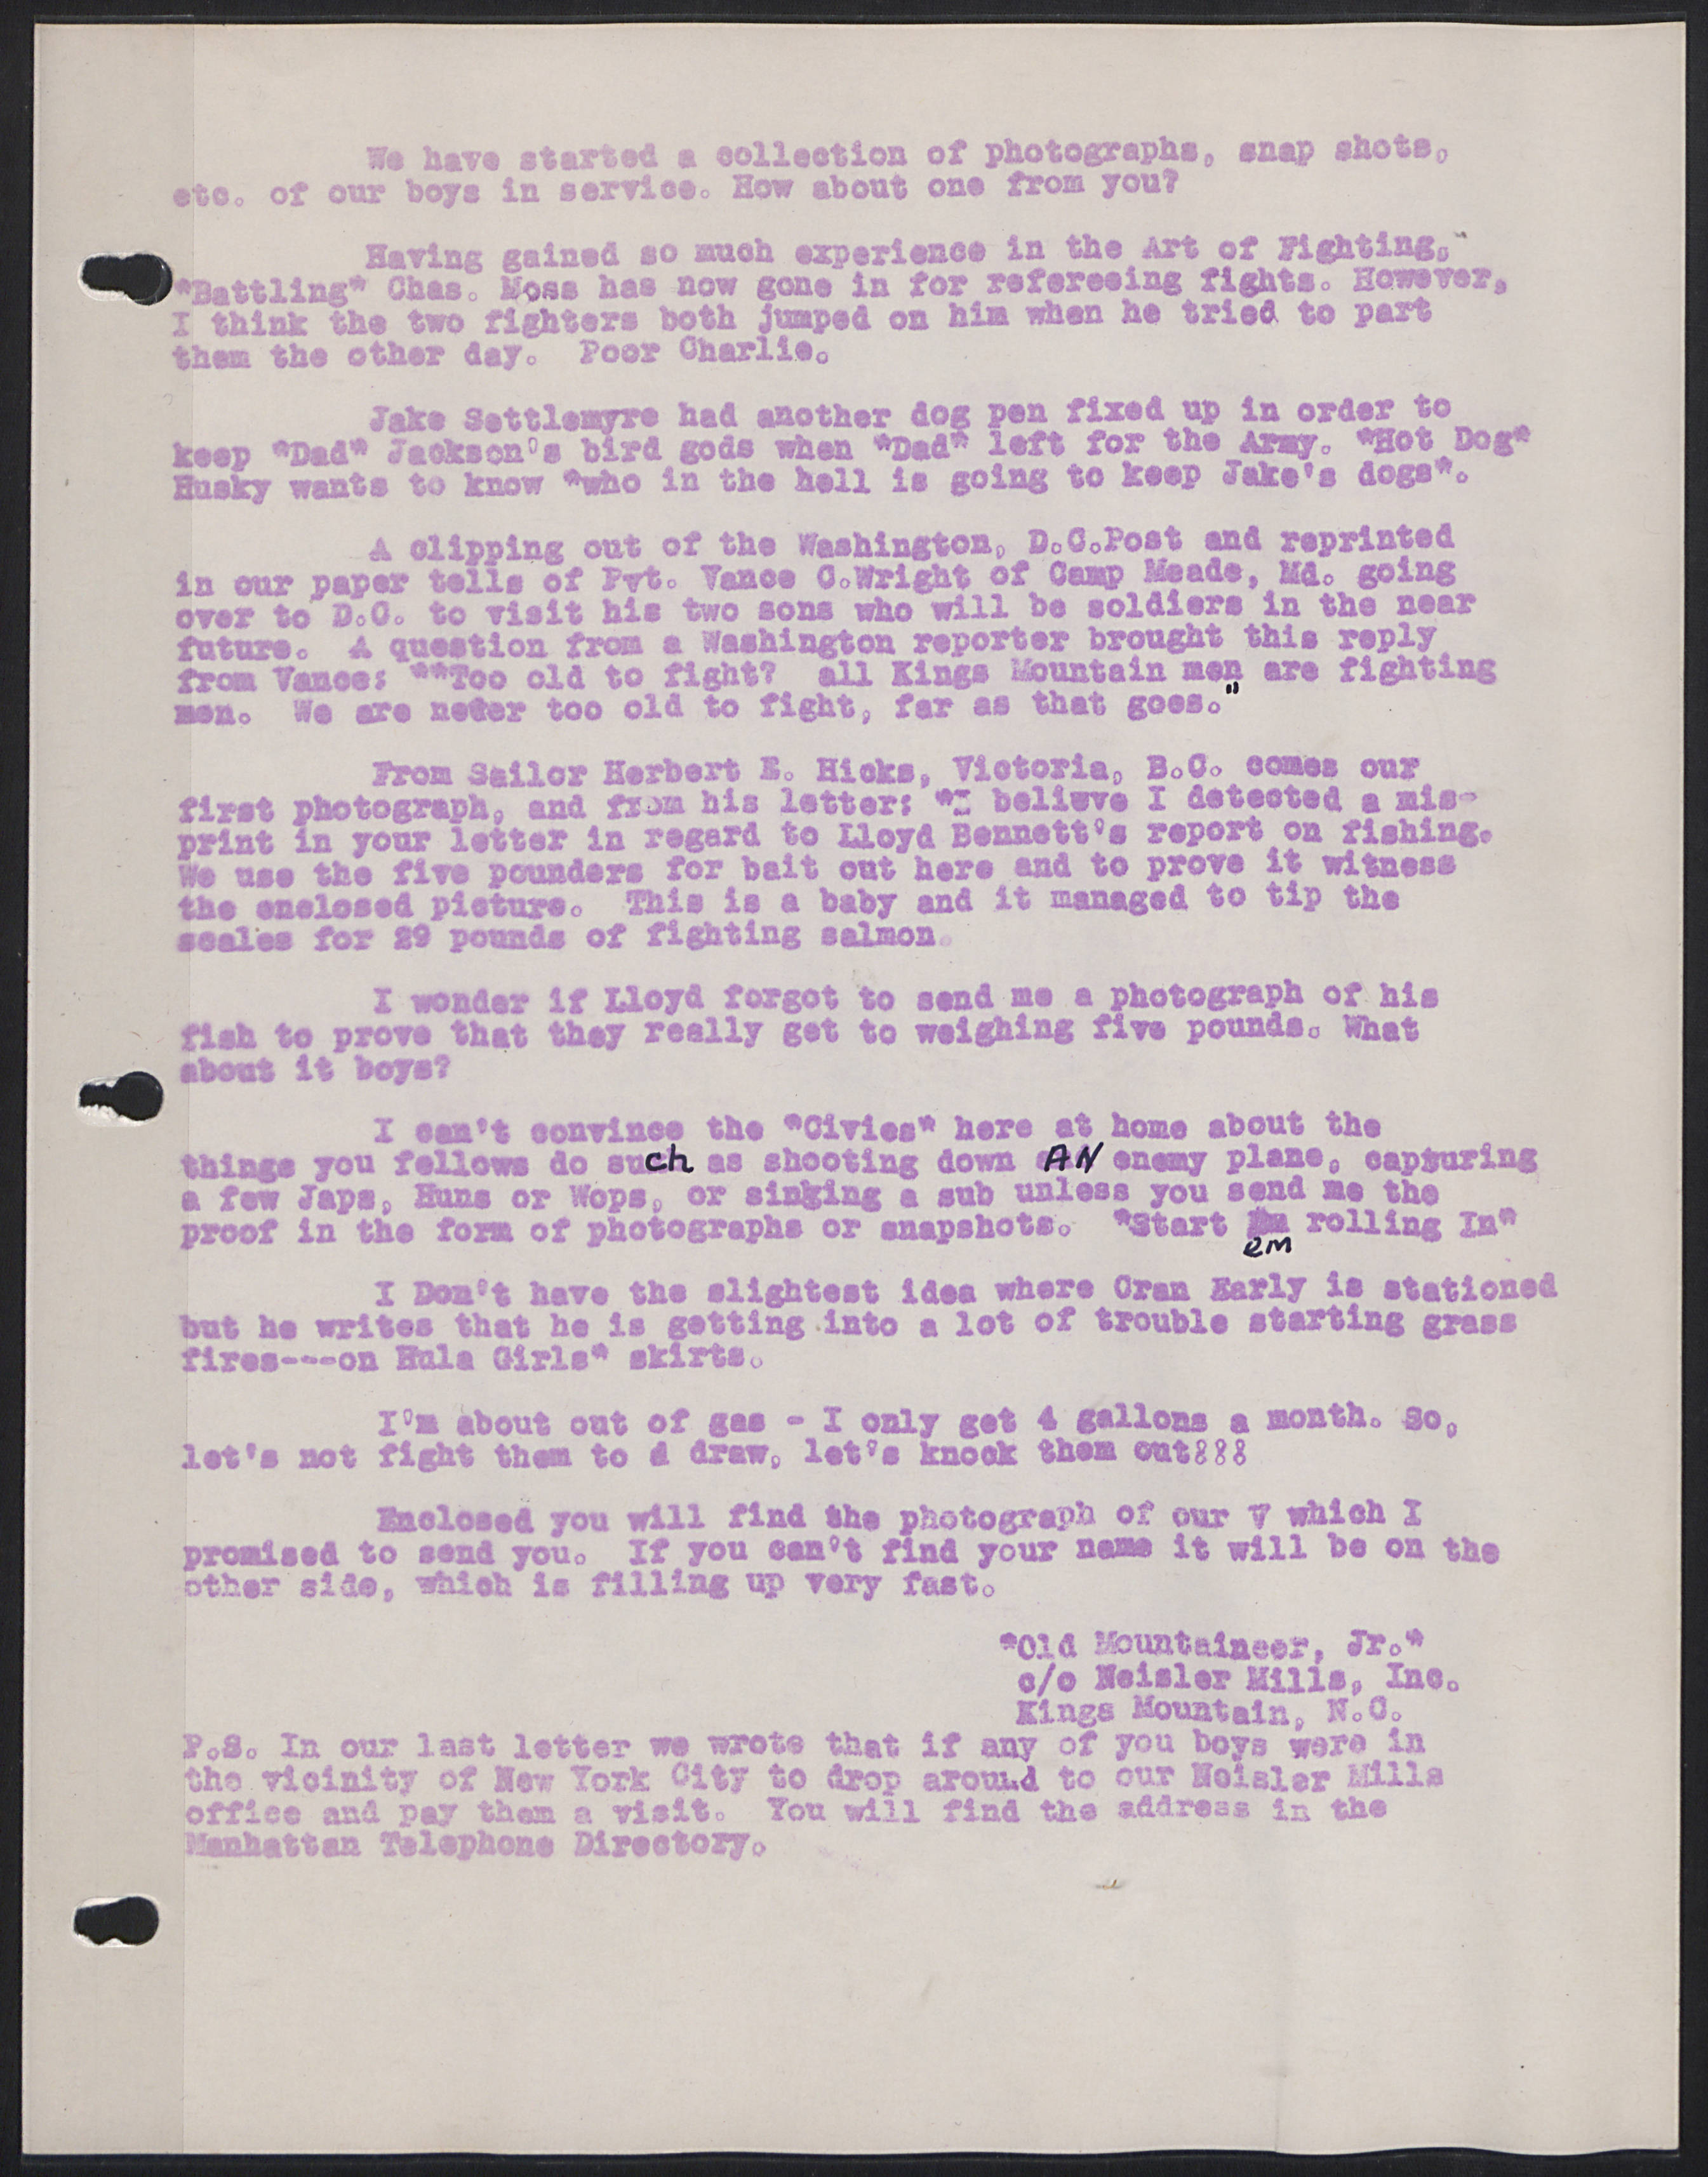 The Old Mountaineer Letters to Servicemen page 12